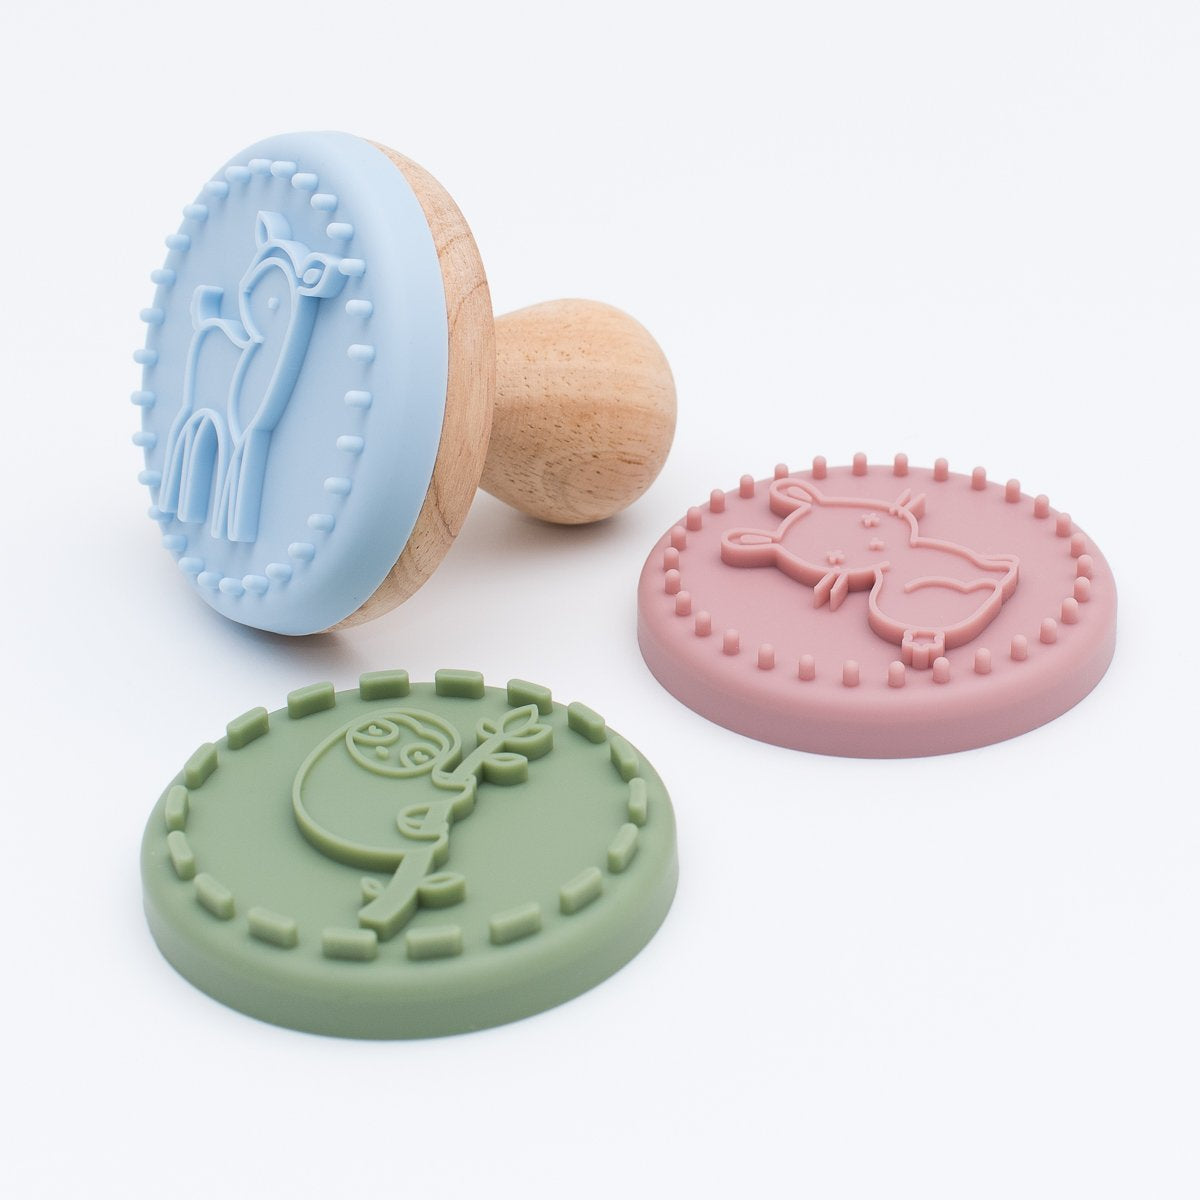 Stampies® – The Fun Silicone Animal Cookie Stamps